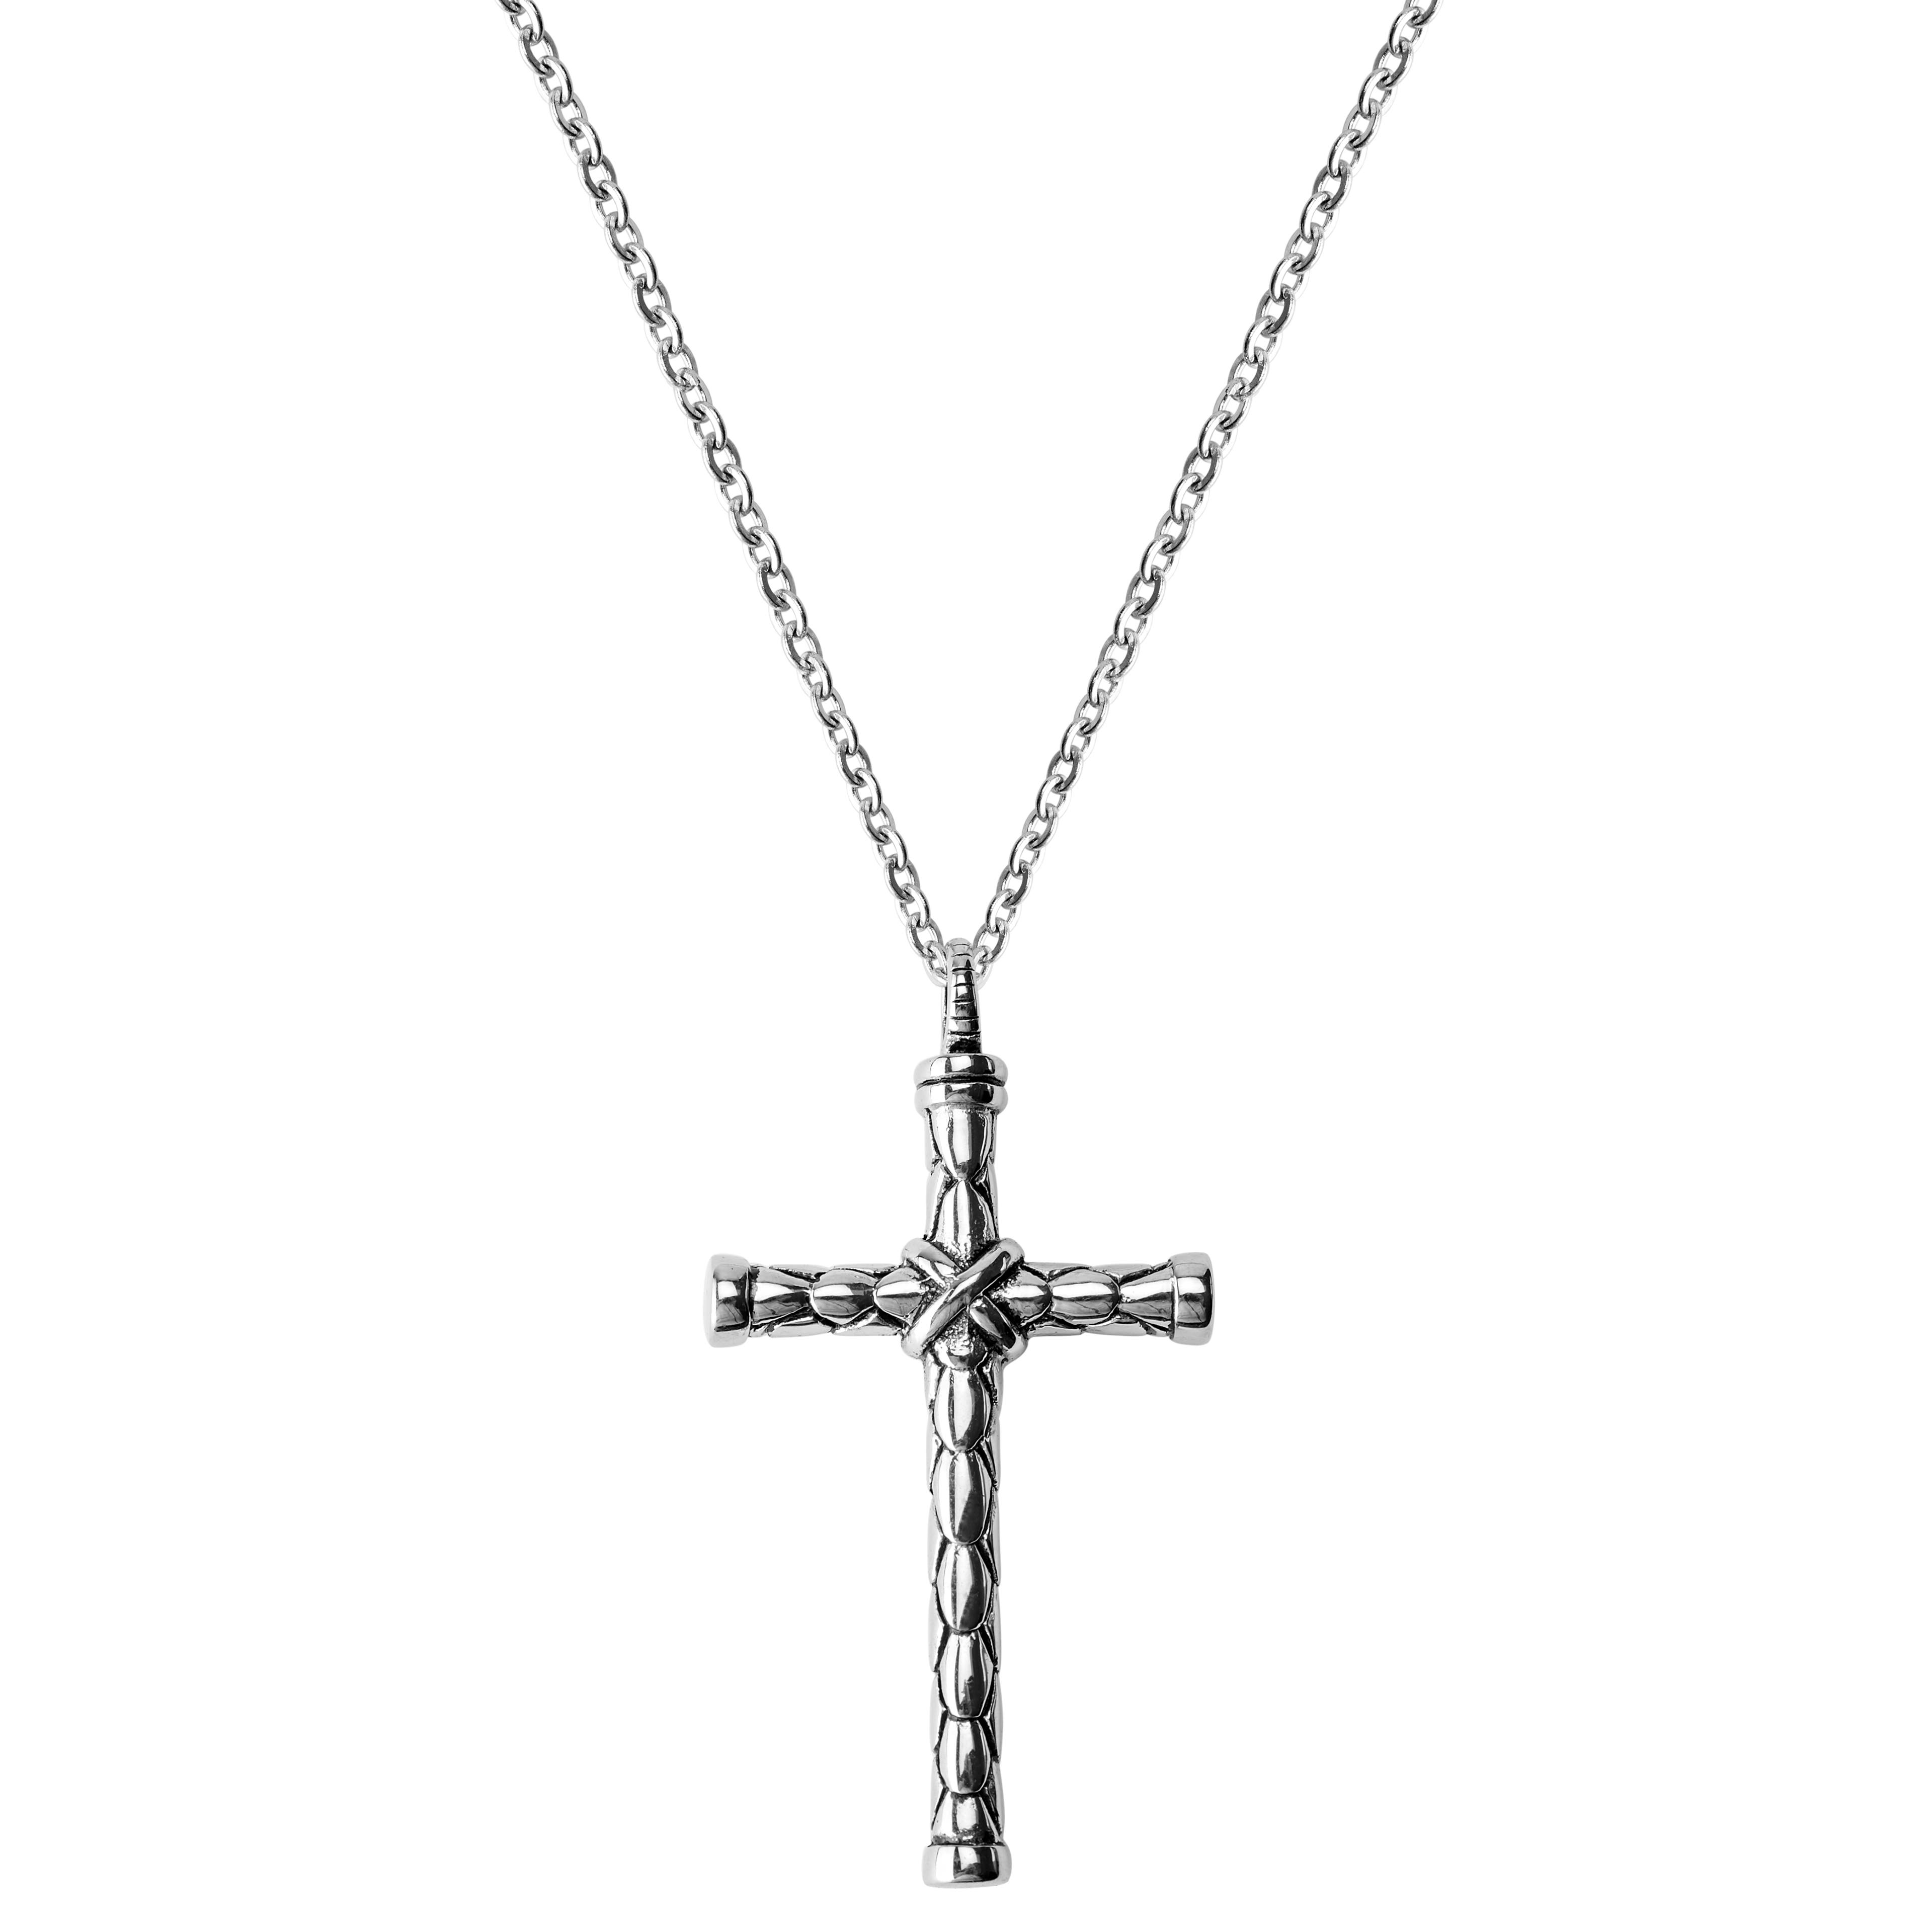 Silver-Tone Stainless Steel Cross With Scales Cable Chain Necklace